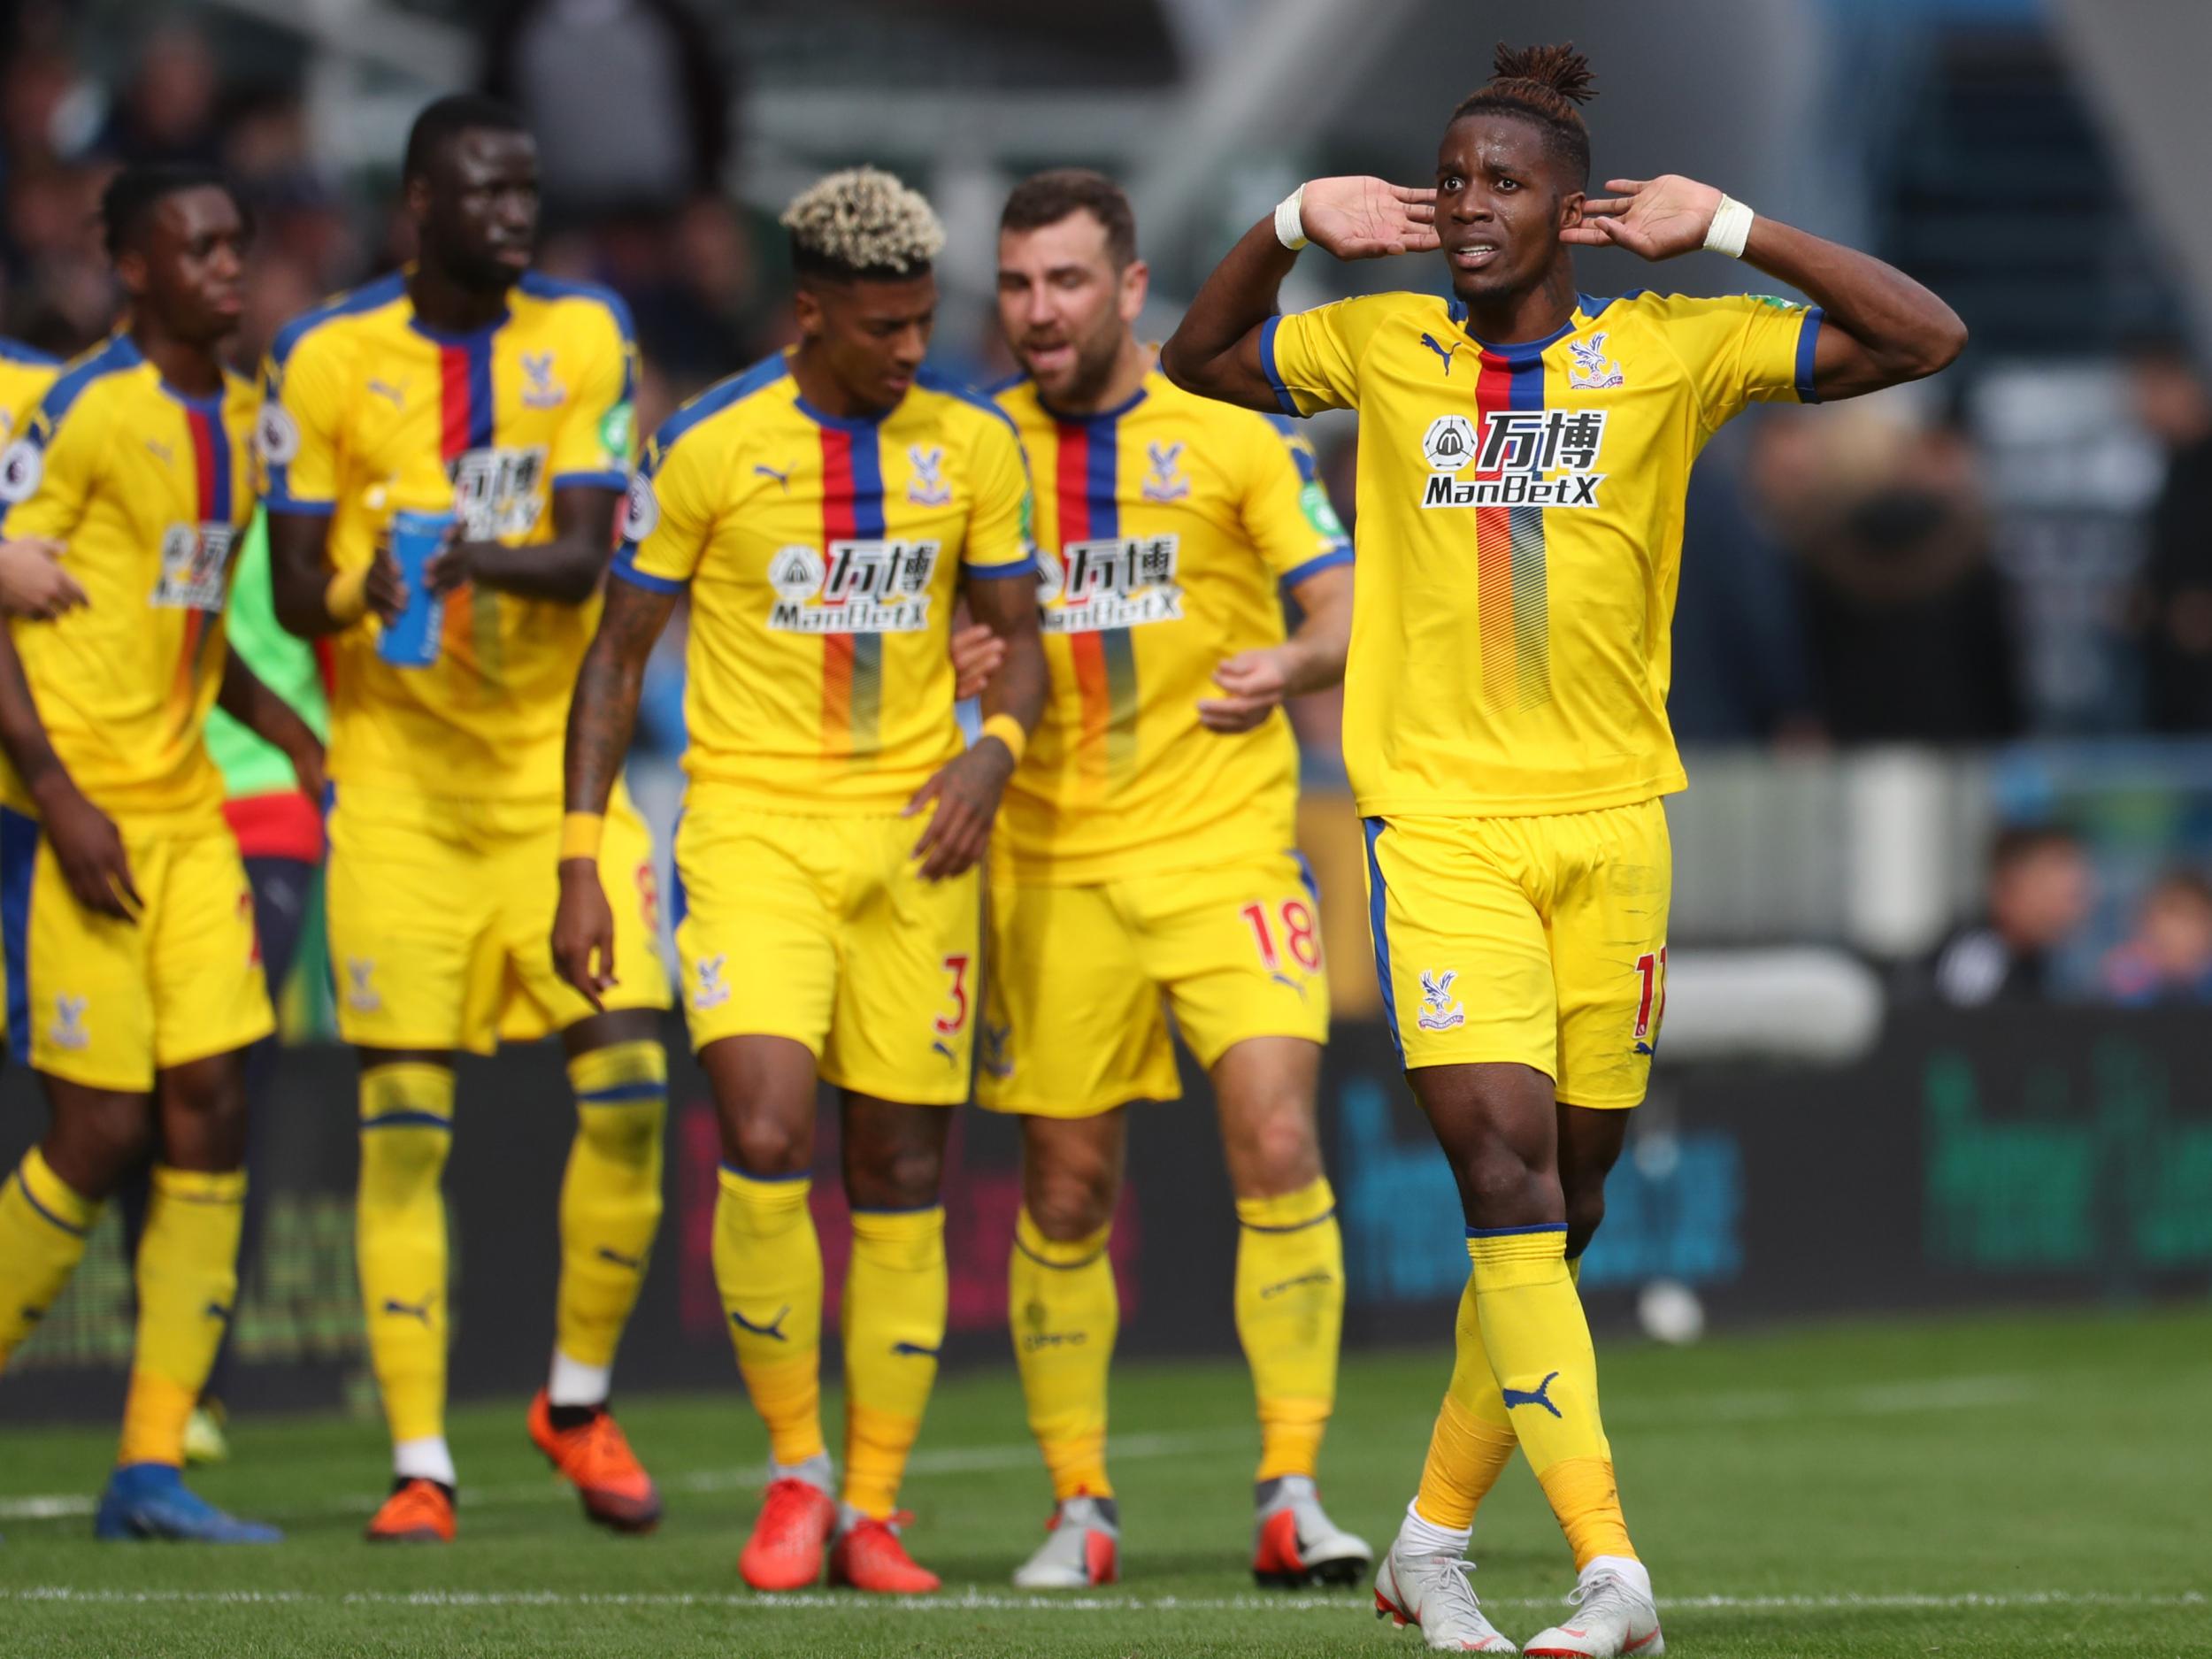 Crystal Palace and Wilfired Zaha had the last laugh in their 1-0 win